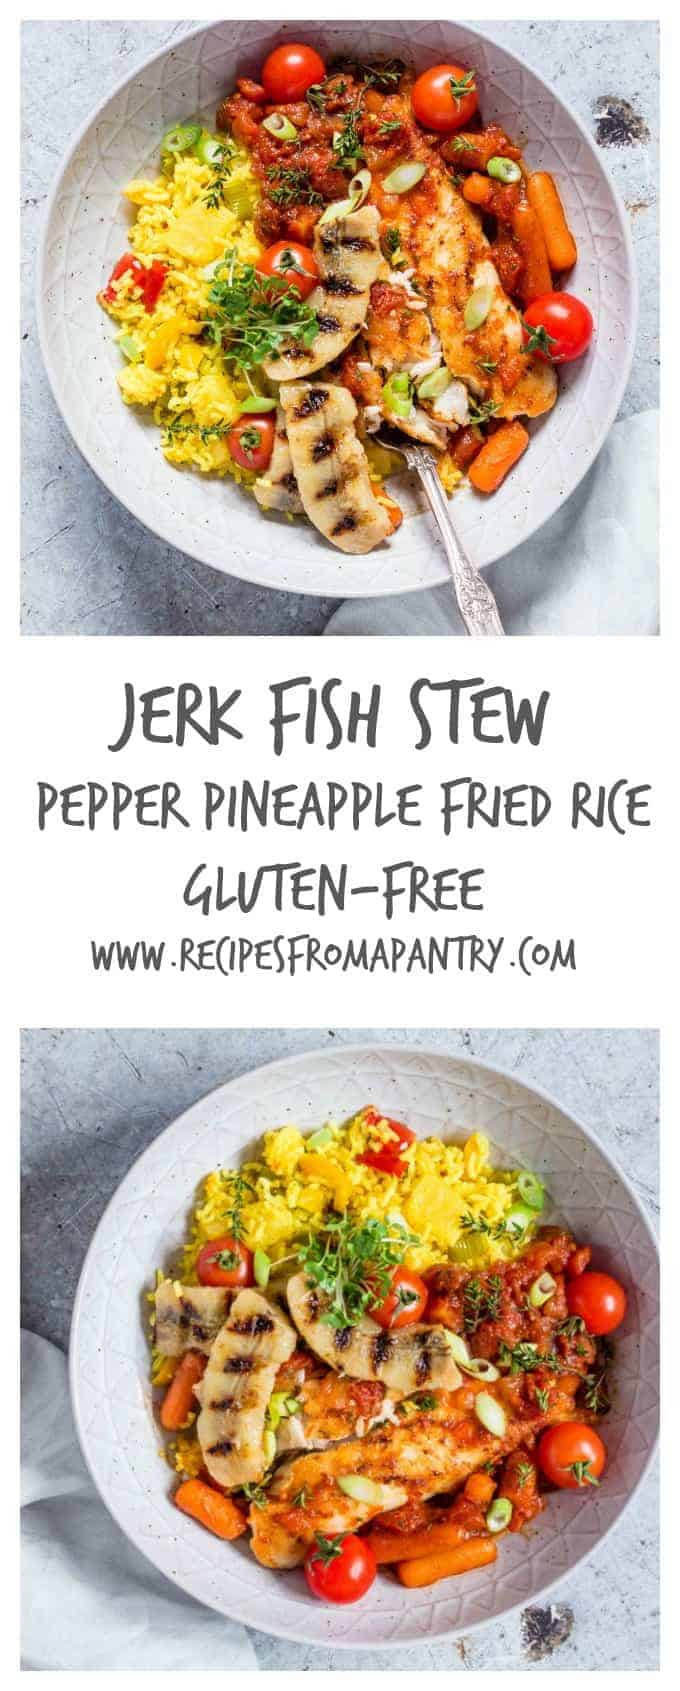 Rice Recipes For Fish
 Jerk Fish Stew With Pepper Pineapple Fried Rice Recipes